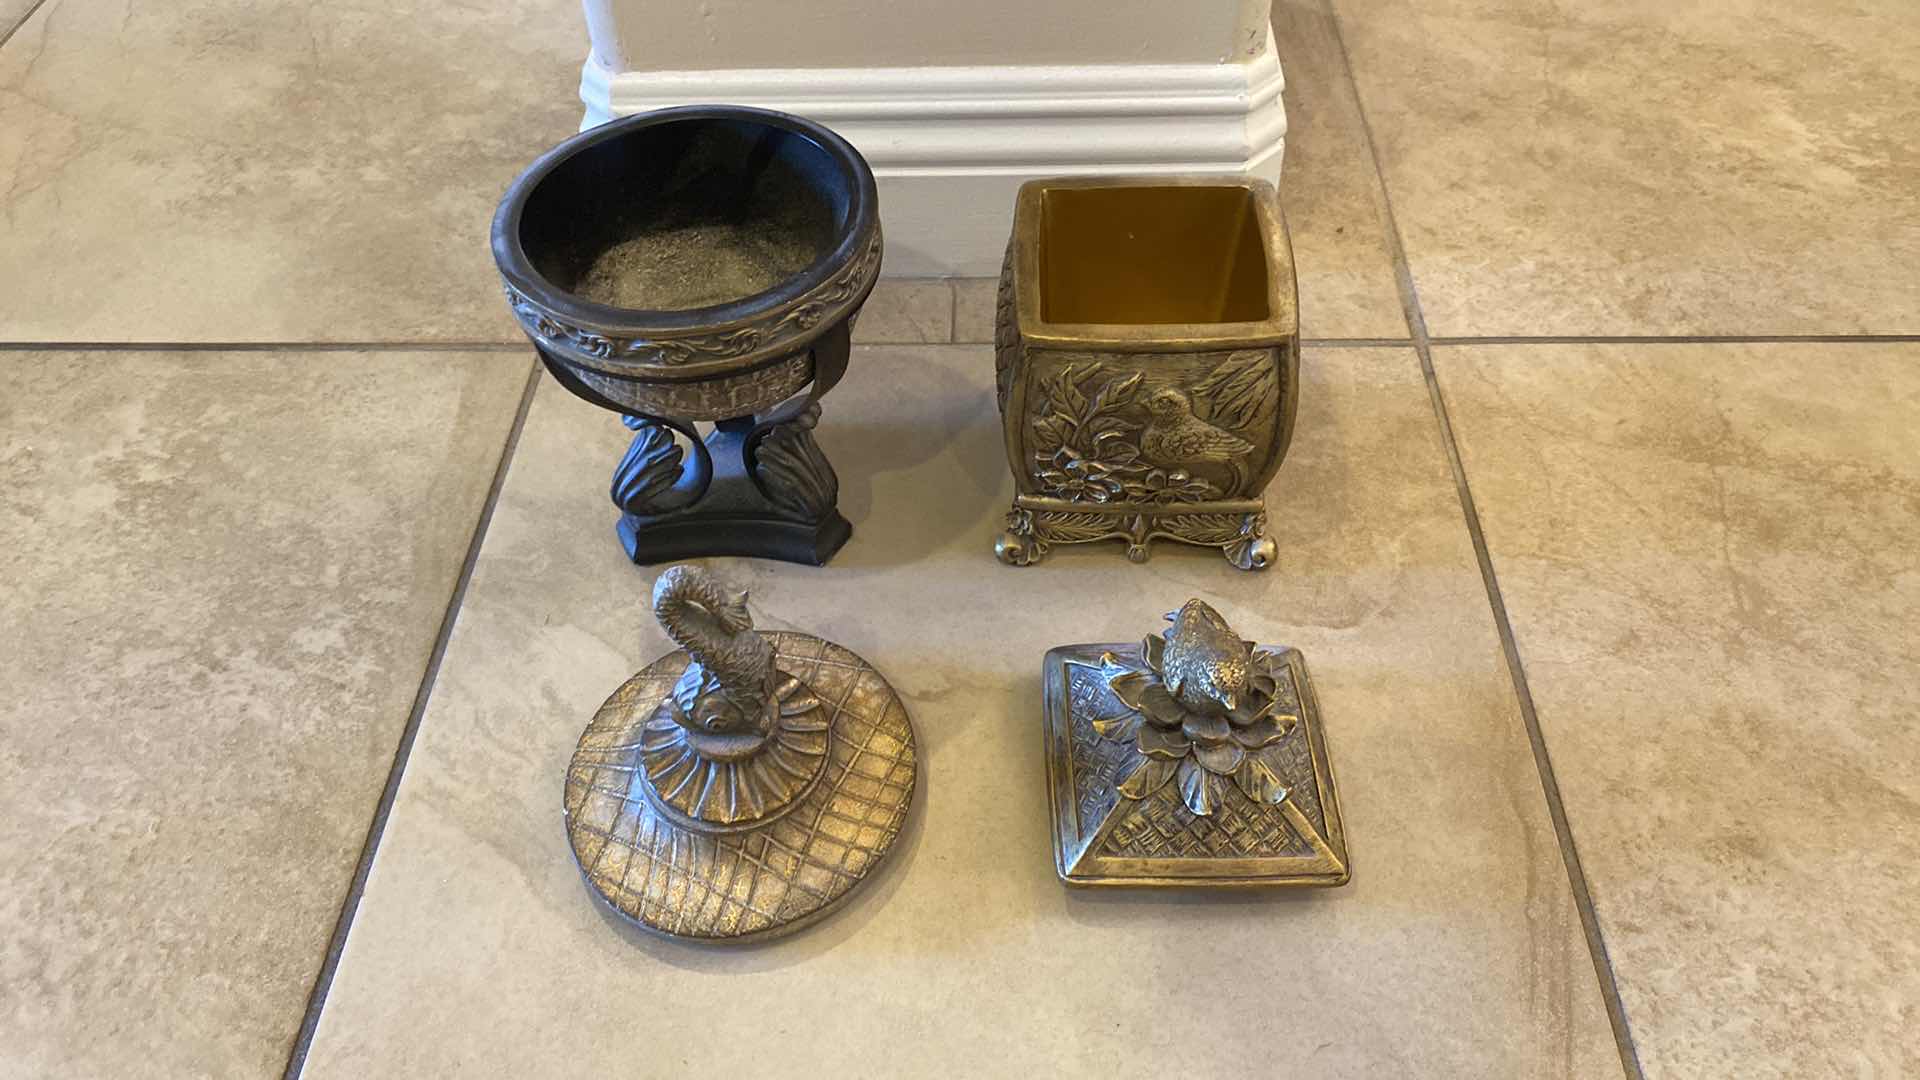 Photo 4 of PAIR OF COVERED URNS WITH LIDS LARGEST H 11 1/2”